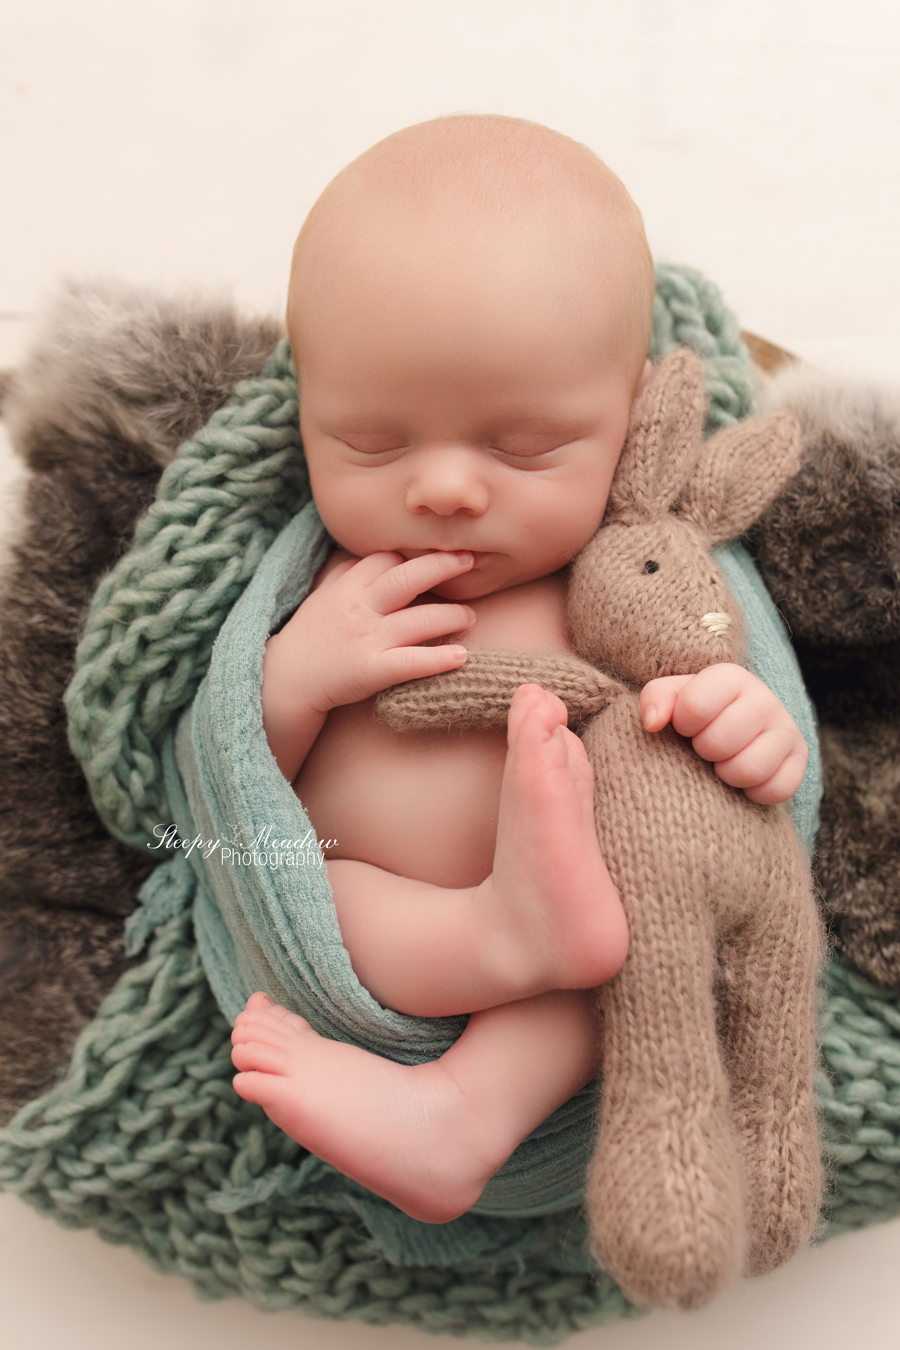 Baby boy poses with stuffed bunny for his newborn session by Sleepy Meadow Photography of Milwaukee